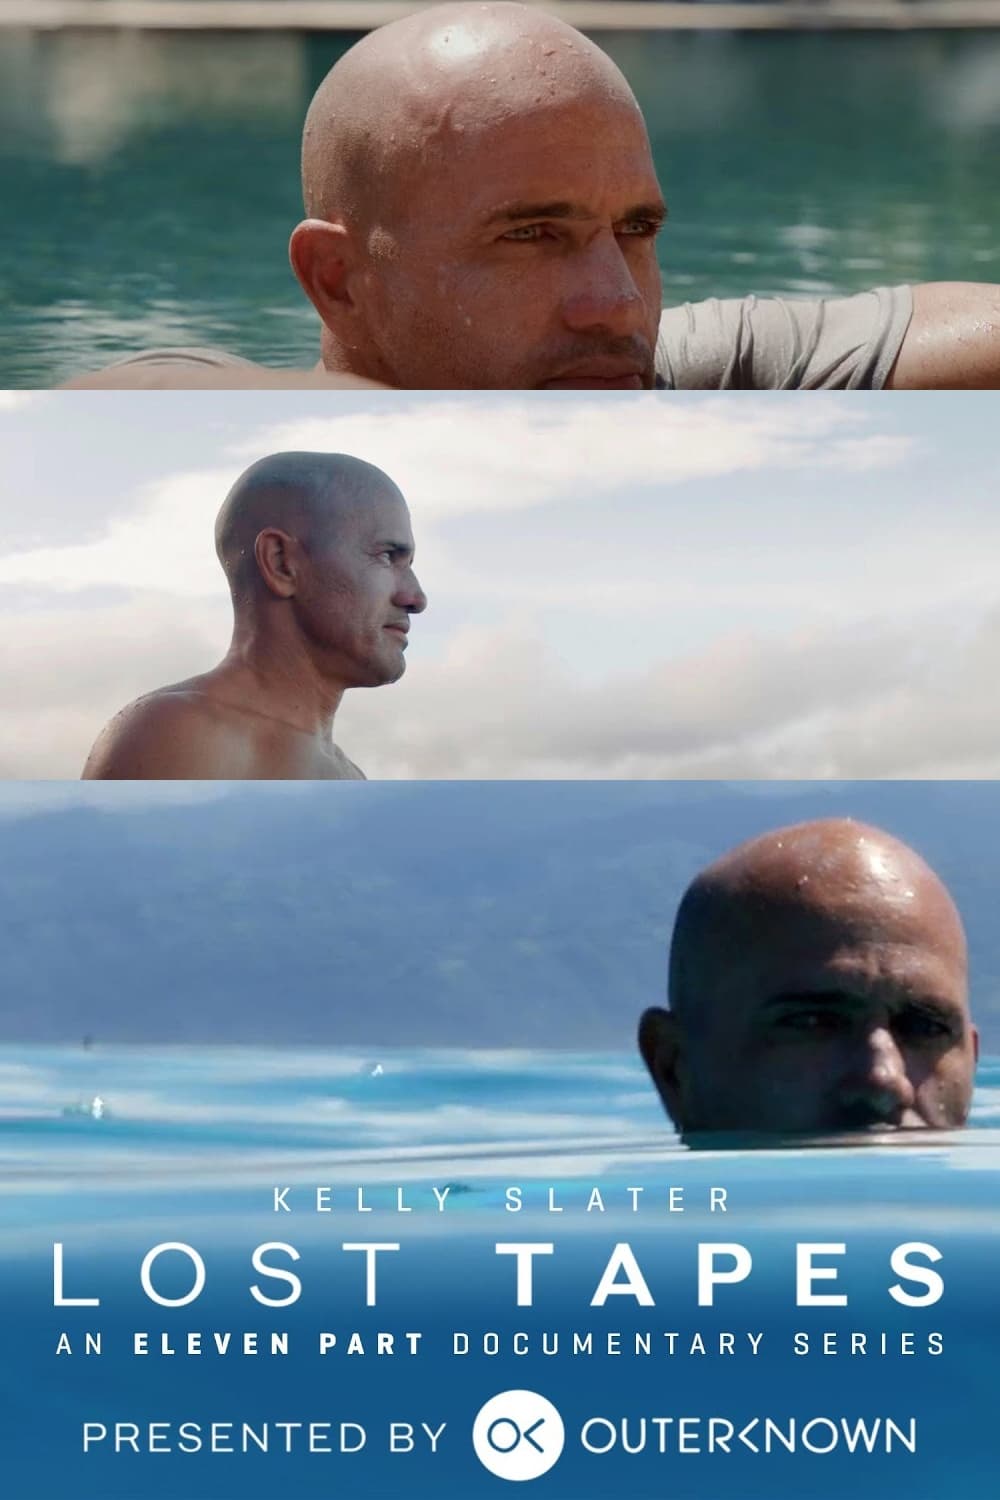 Kelly Slater: The Lost Tapes